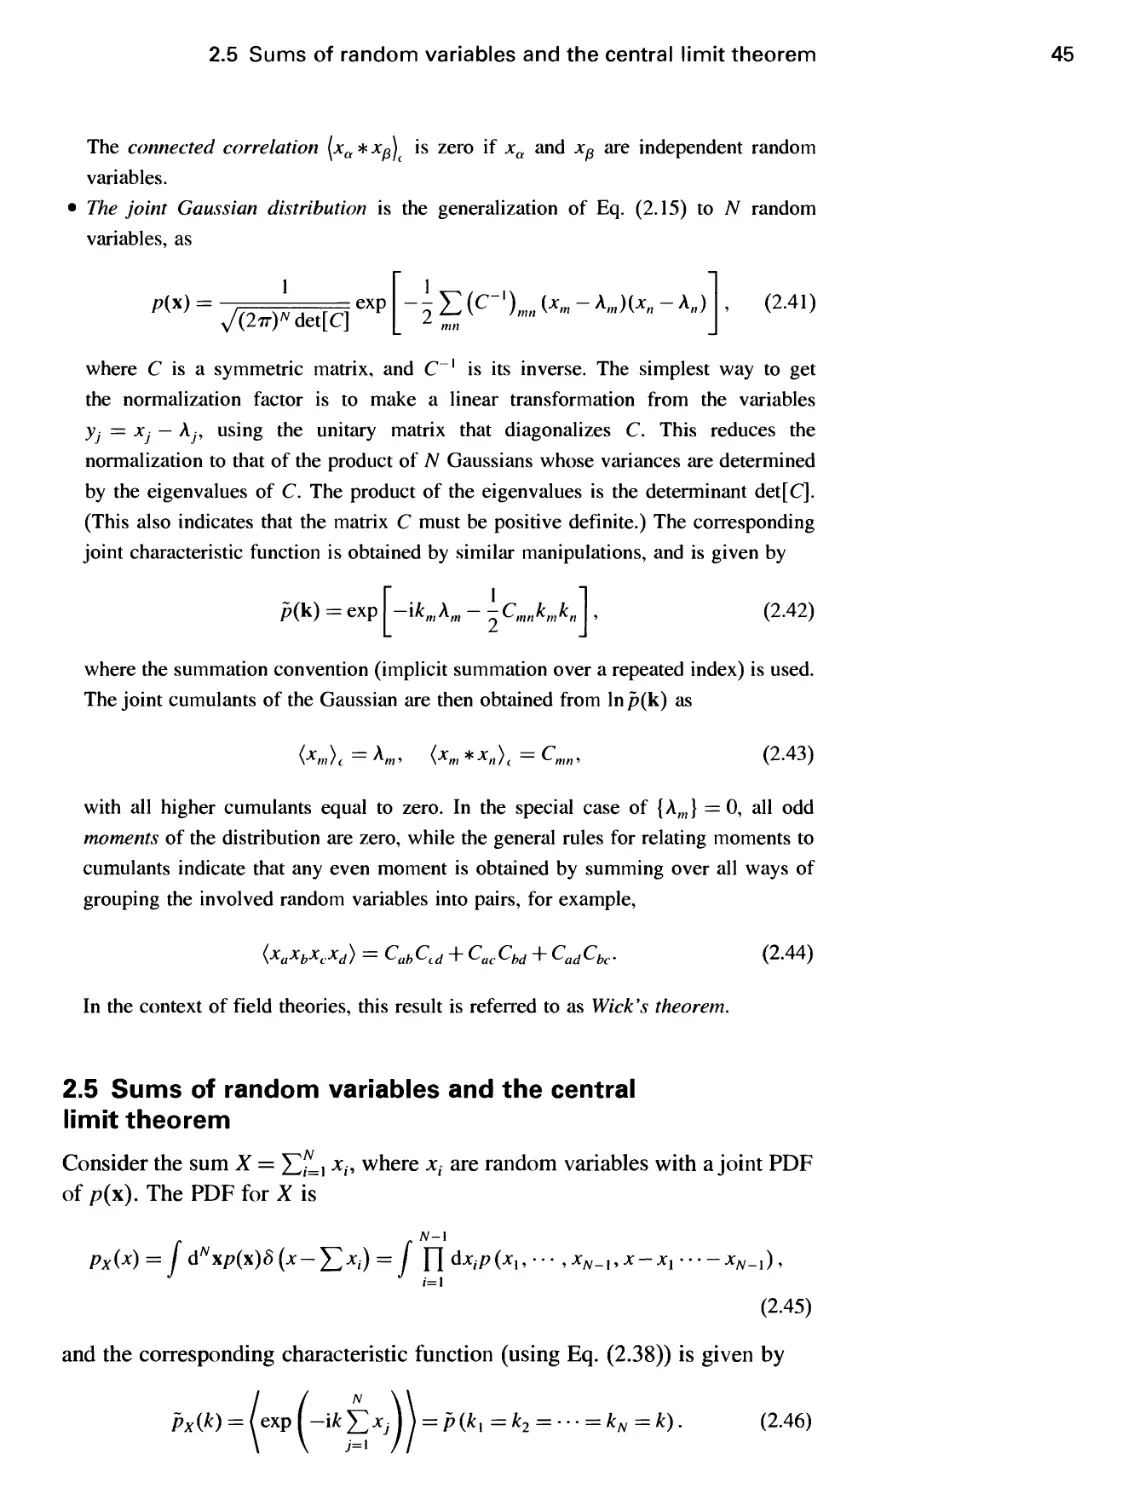 2.5 Sums of random variables and the central limit theorem